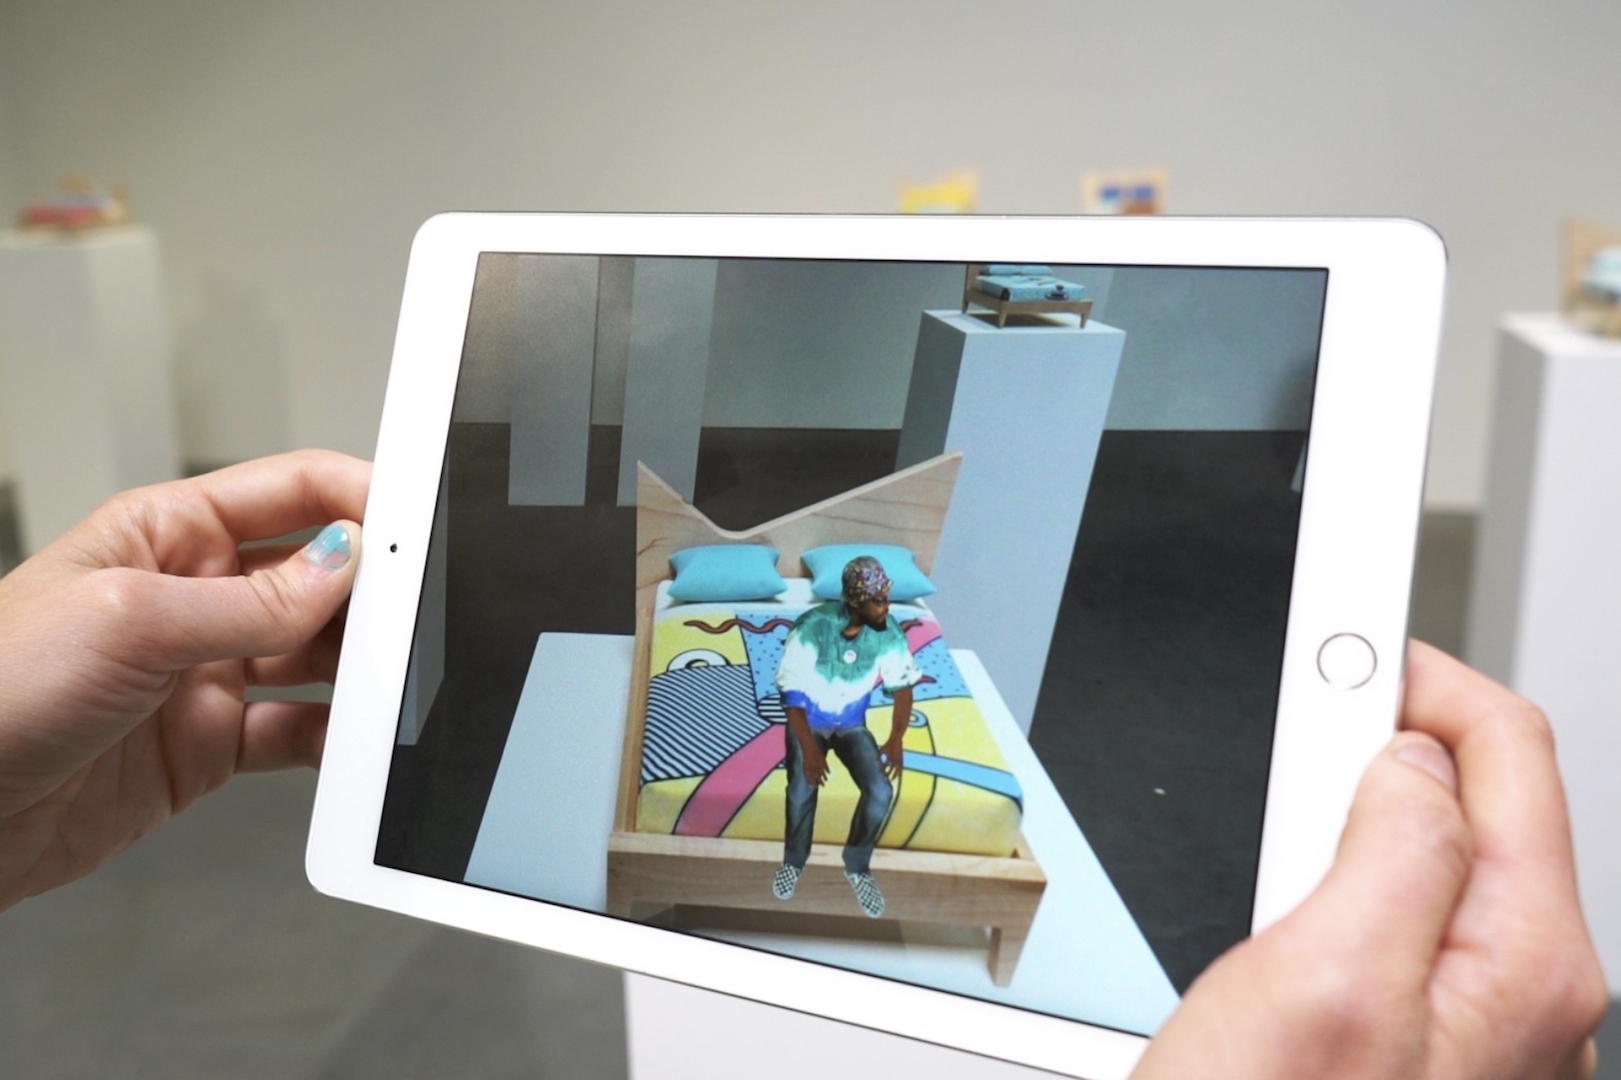 Someone holding up an iPad to a museum object of an empty bed, the Augmented Reality shows a person sitting in bed on the screen